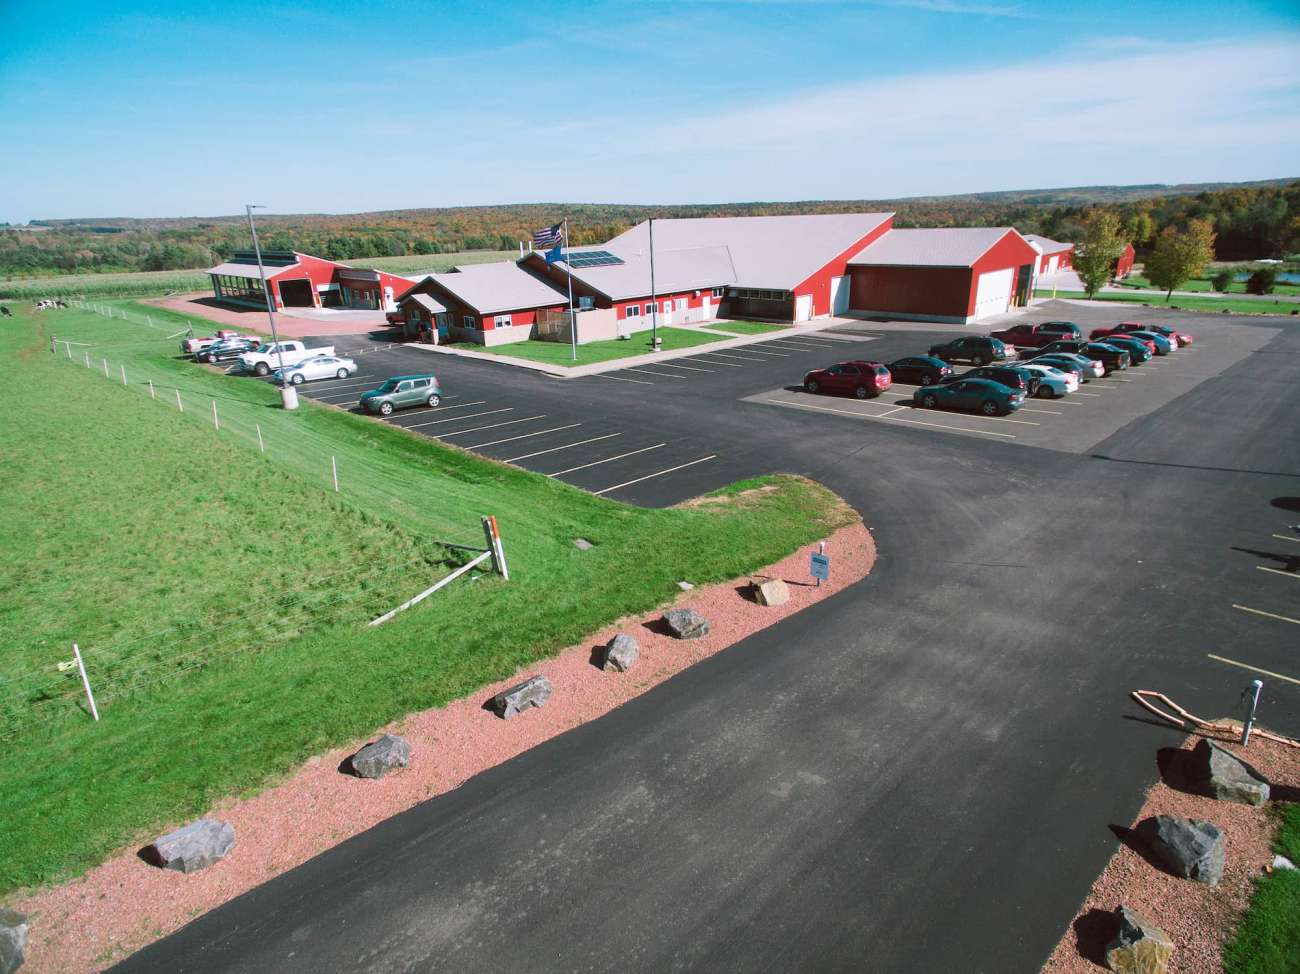 An aerial view of the Agriculture Center of Excellence shows a grazing area for the cows, the pond area, multiple classroom buildings, and the parking lot.